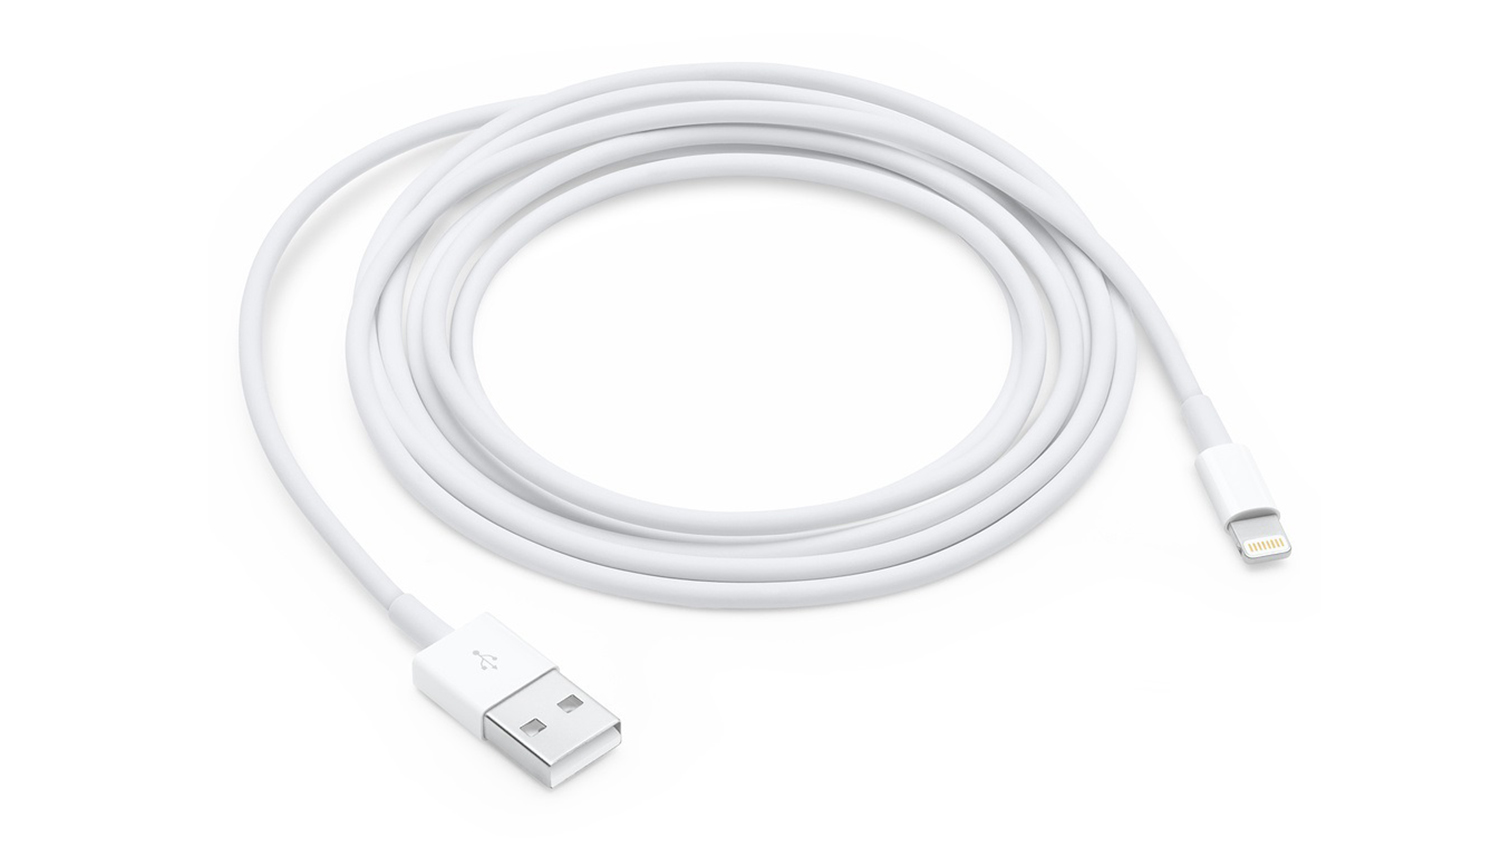 apple lightning cable 2m